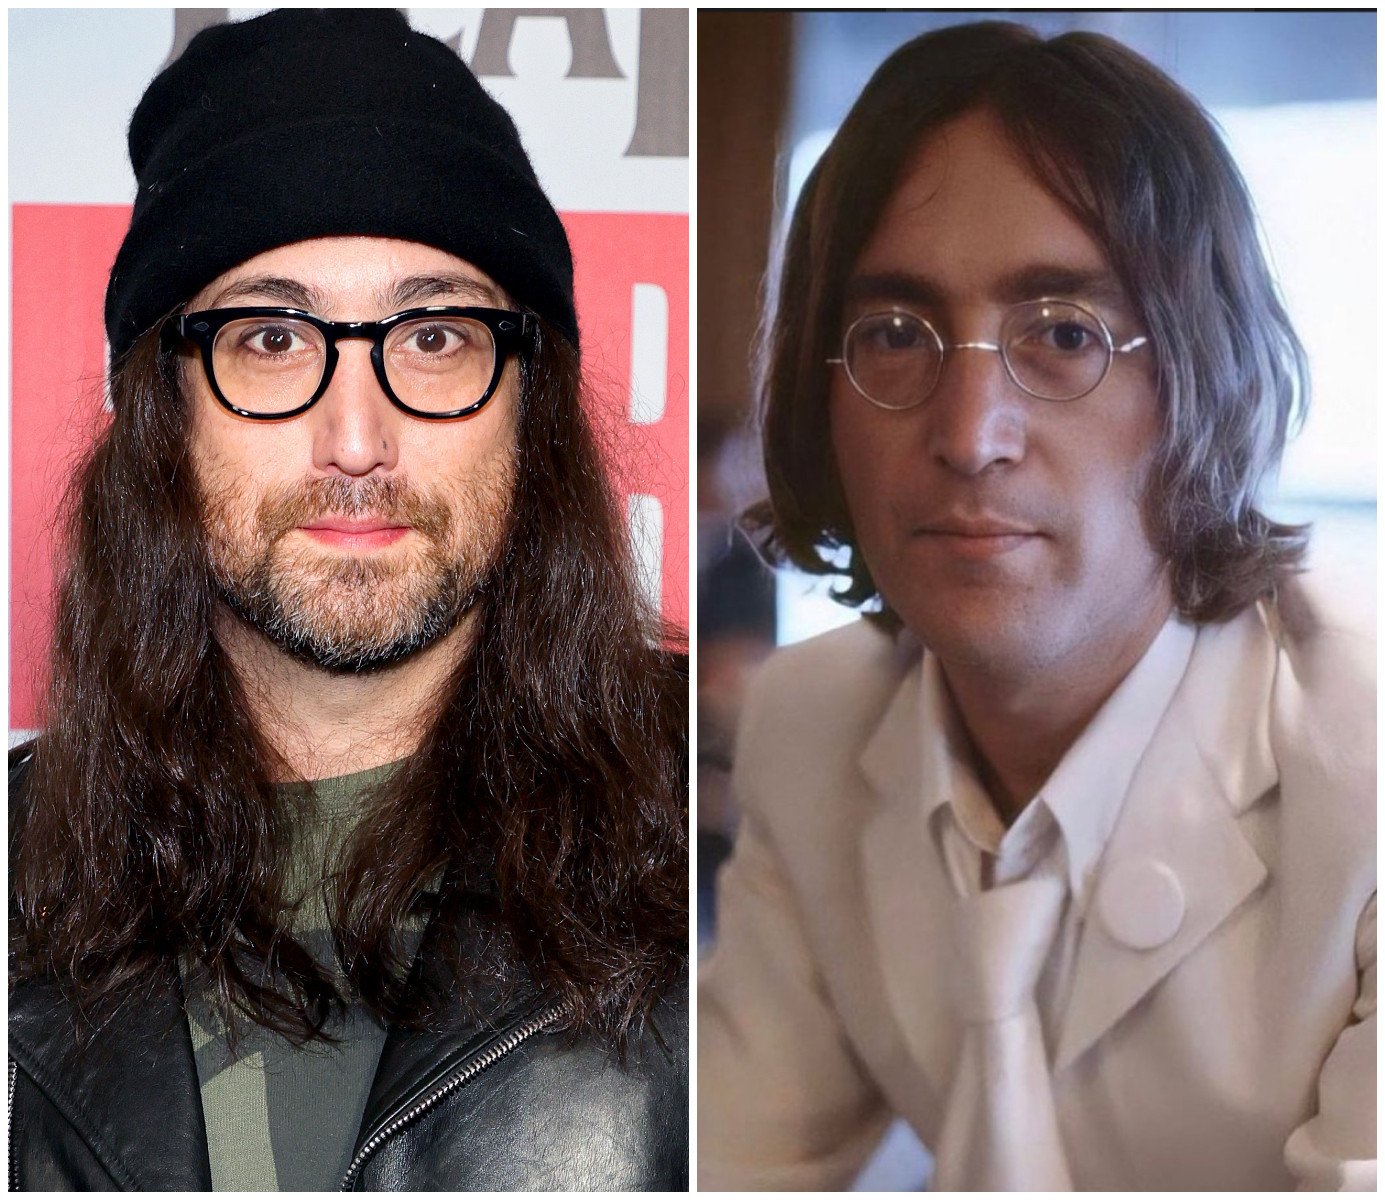 John Lennon and Paul McCartney’s sons recently made headlines making music together, but what do we know about Sean Ono Lennon, who looks just like his late dad? Photos: Getty Images, @johnlennon/Instagram